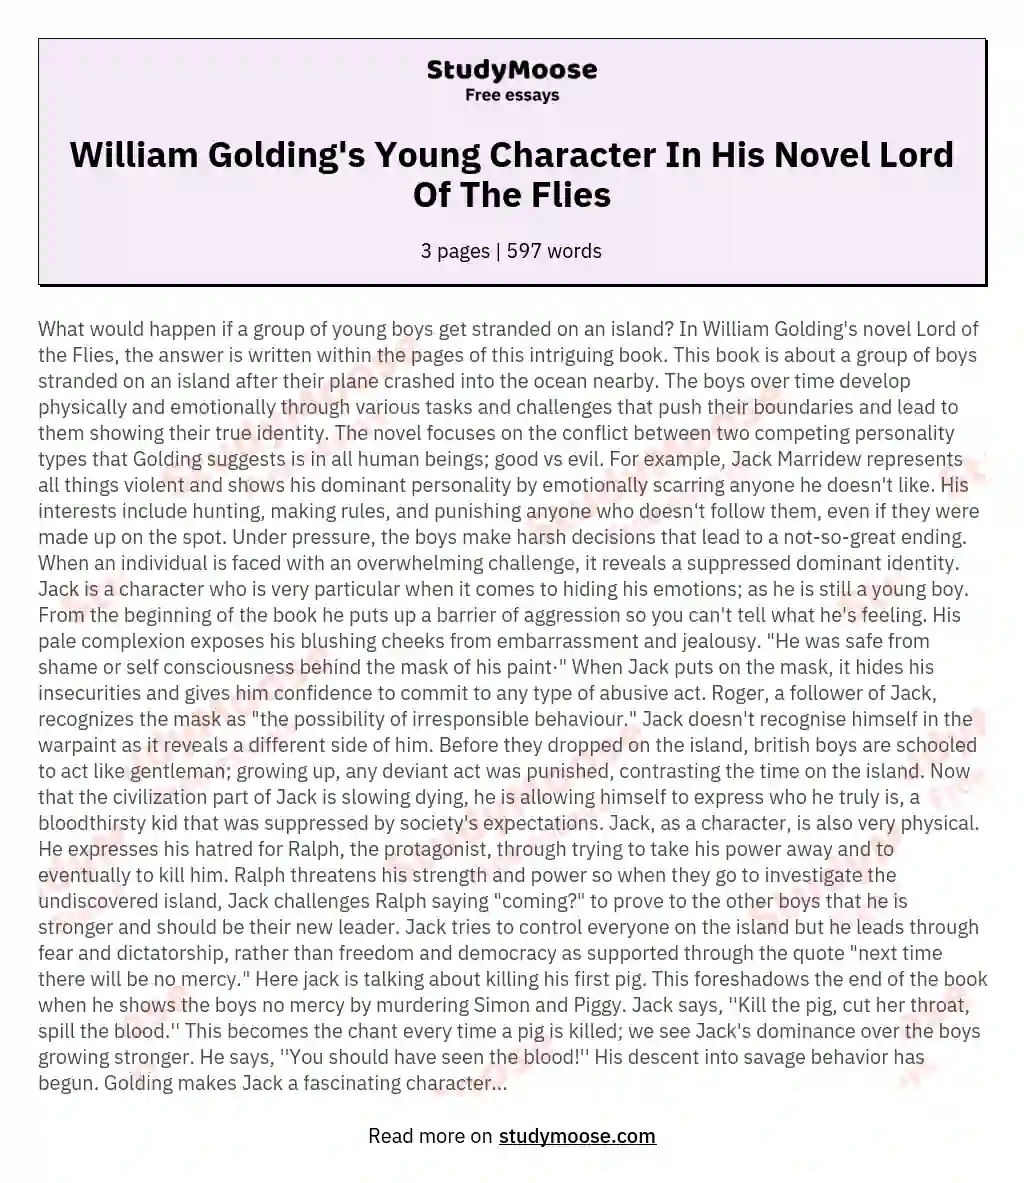 William Golding's Young Character In His Novel Lord Of The Flies essay